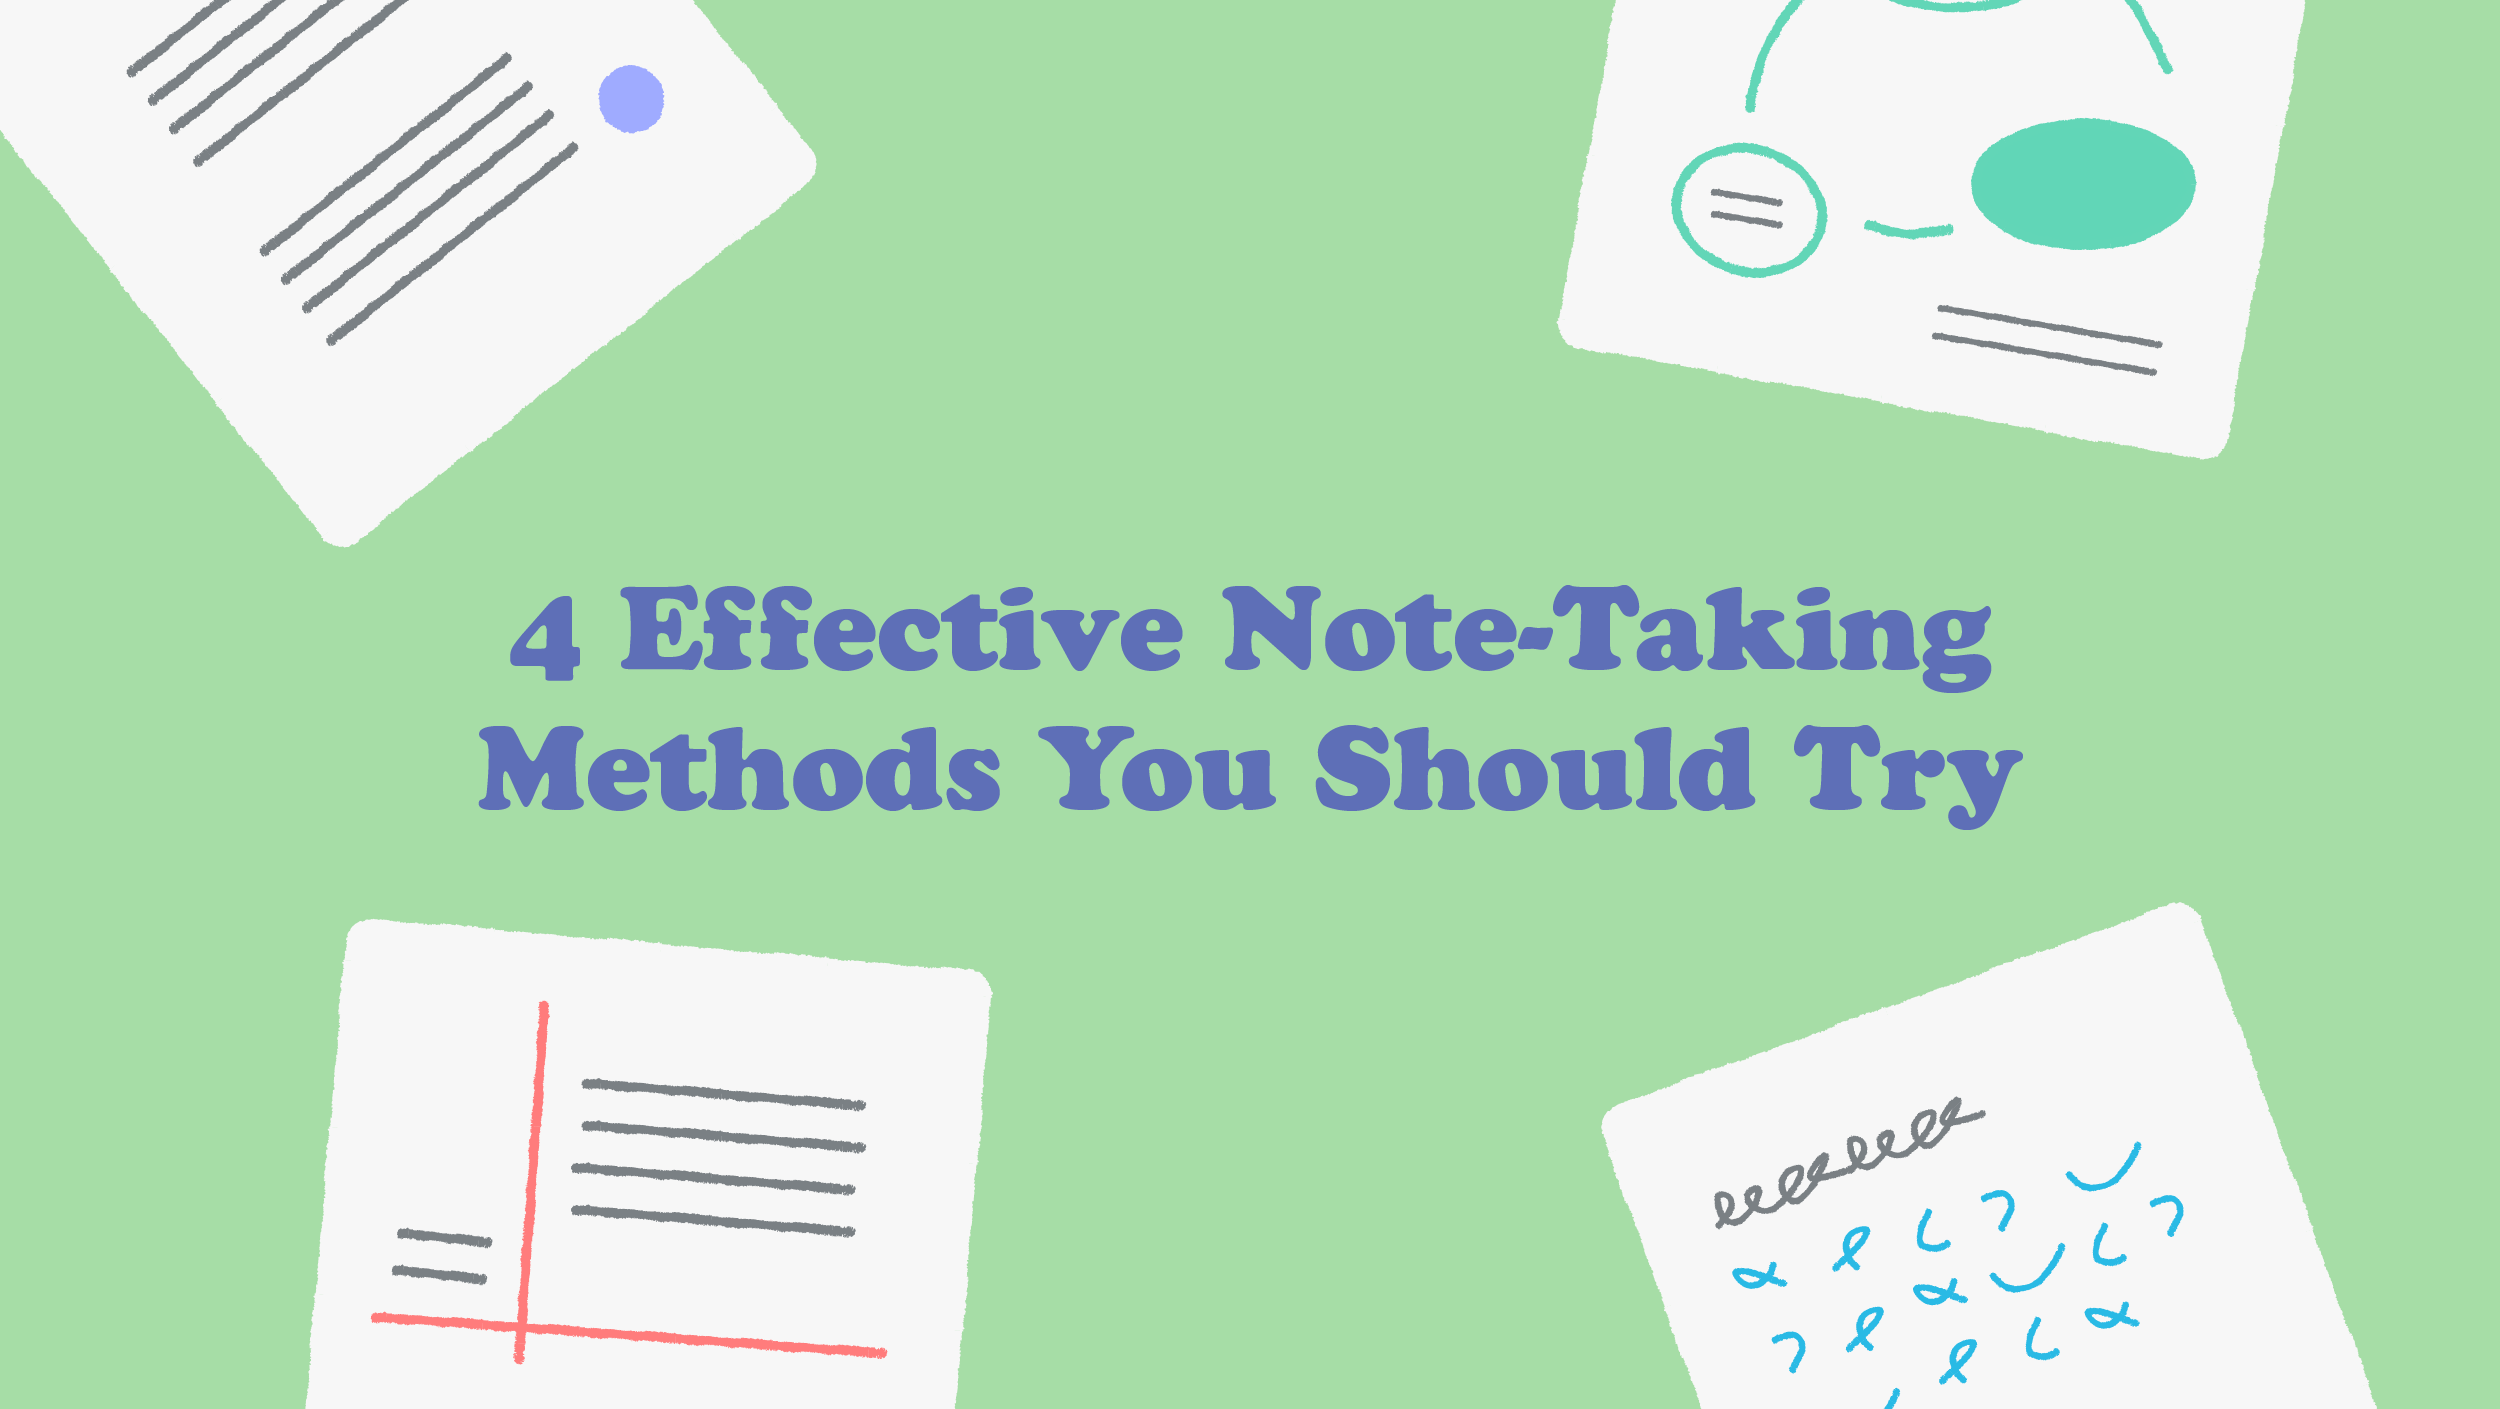 4 Effective Note-taking Methods You Should Try